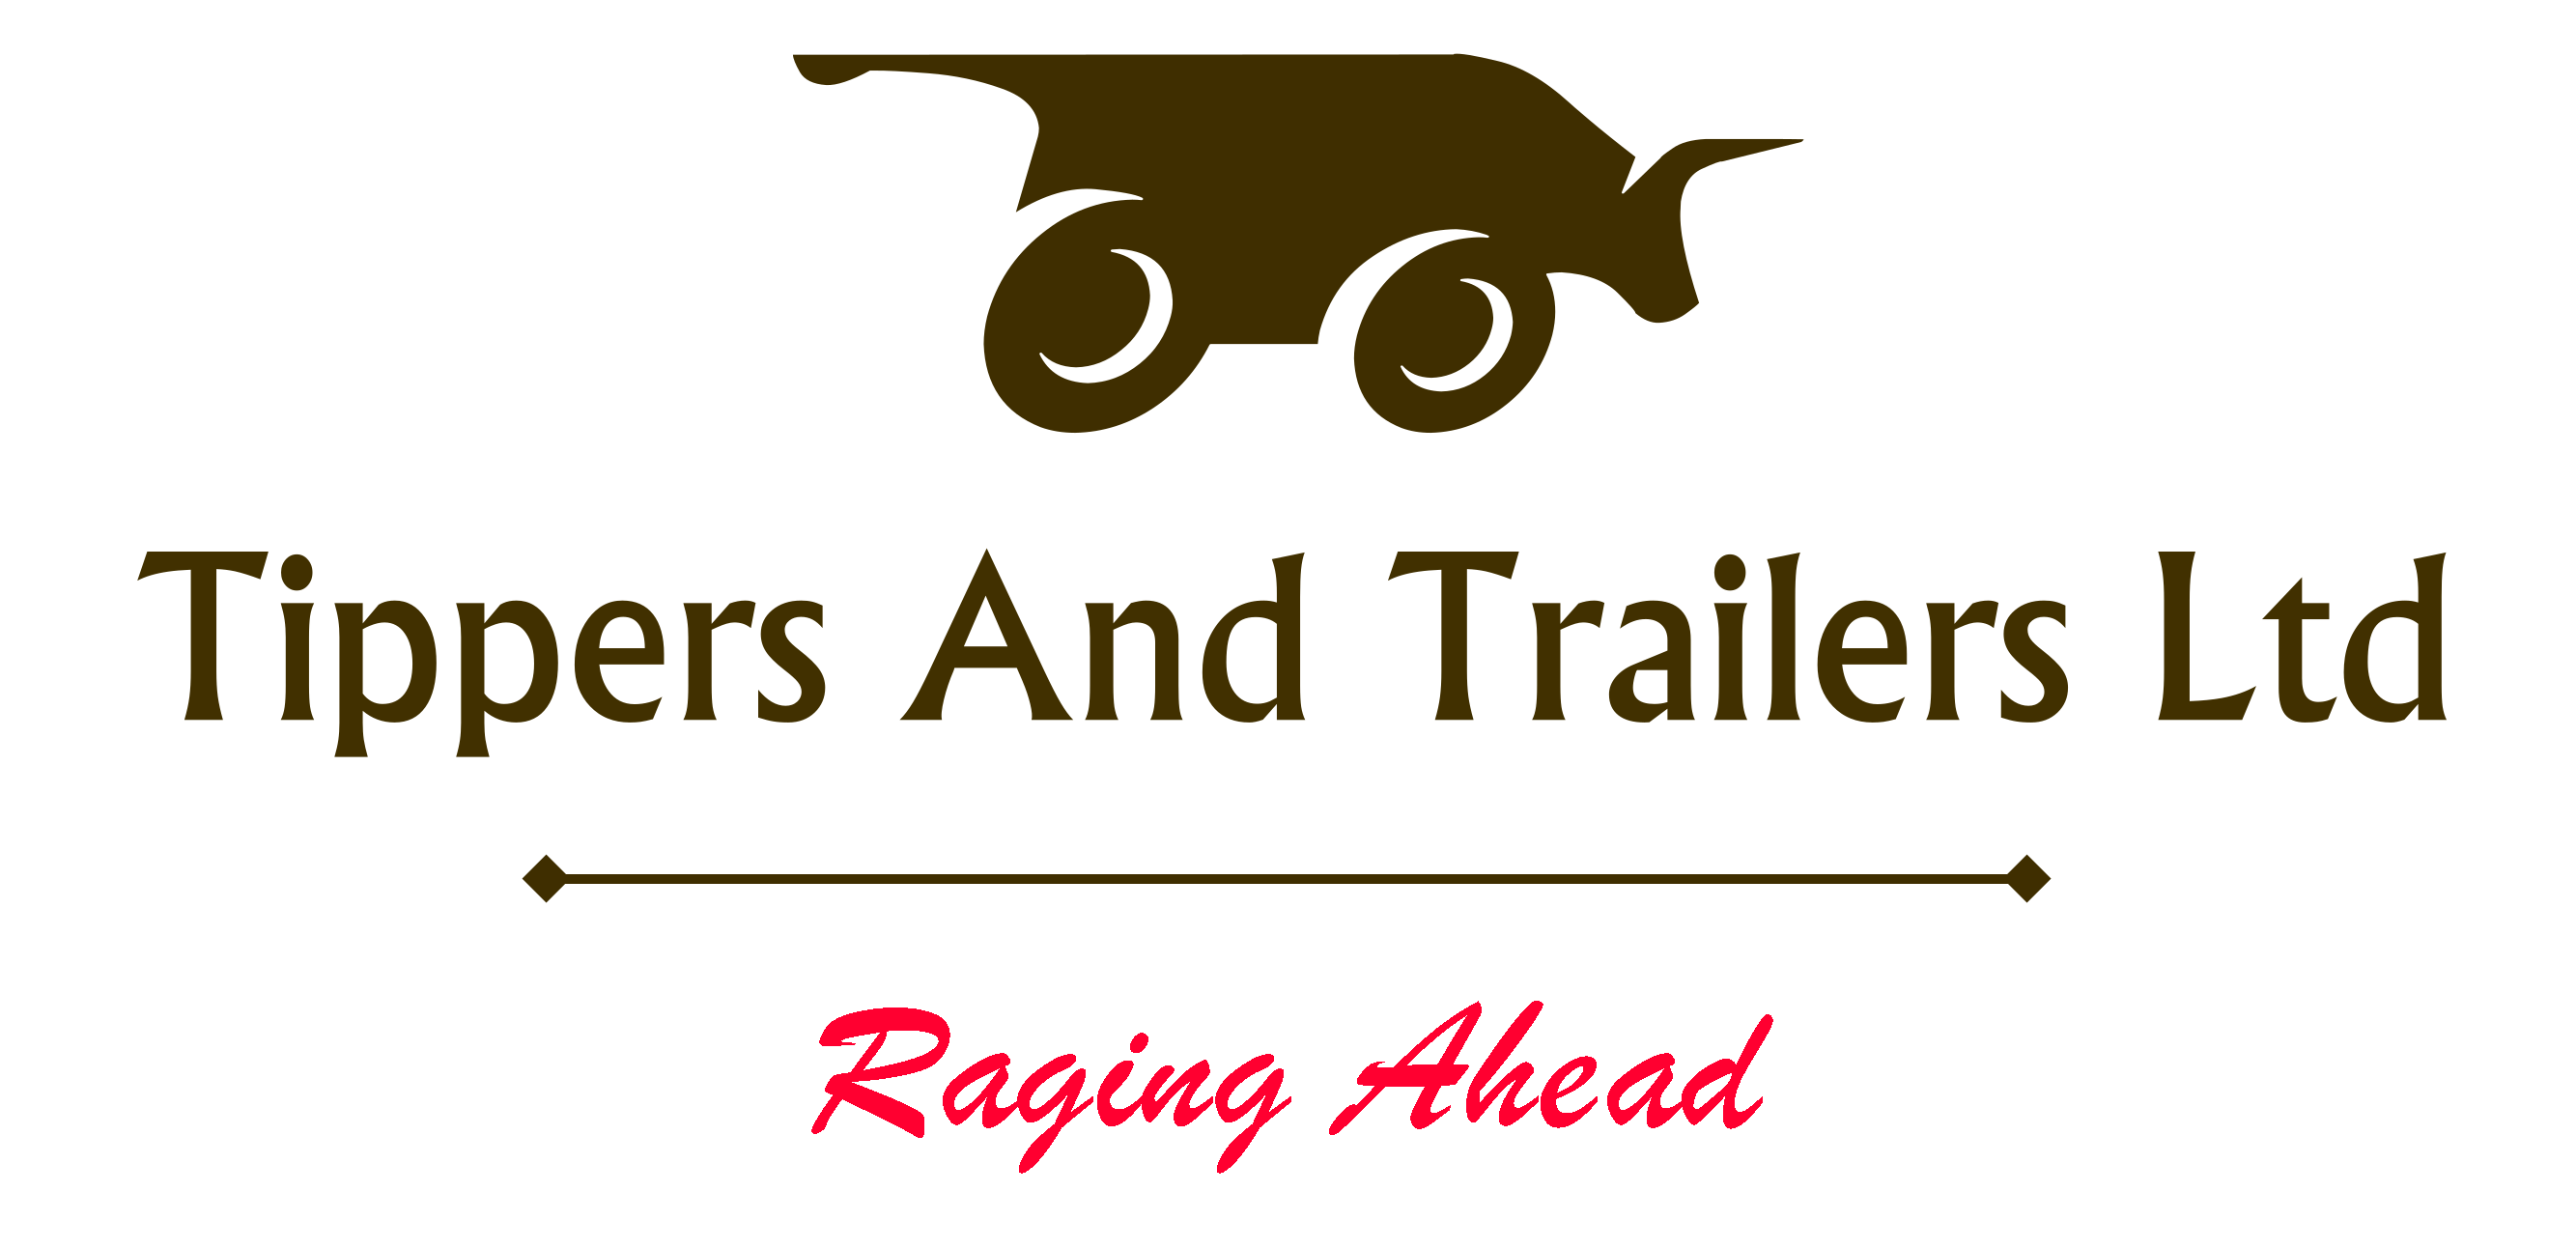 Tippers And Trailers Ltd